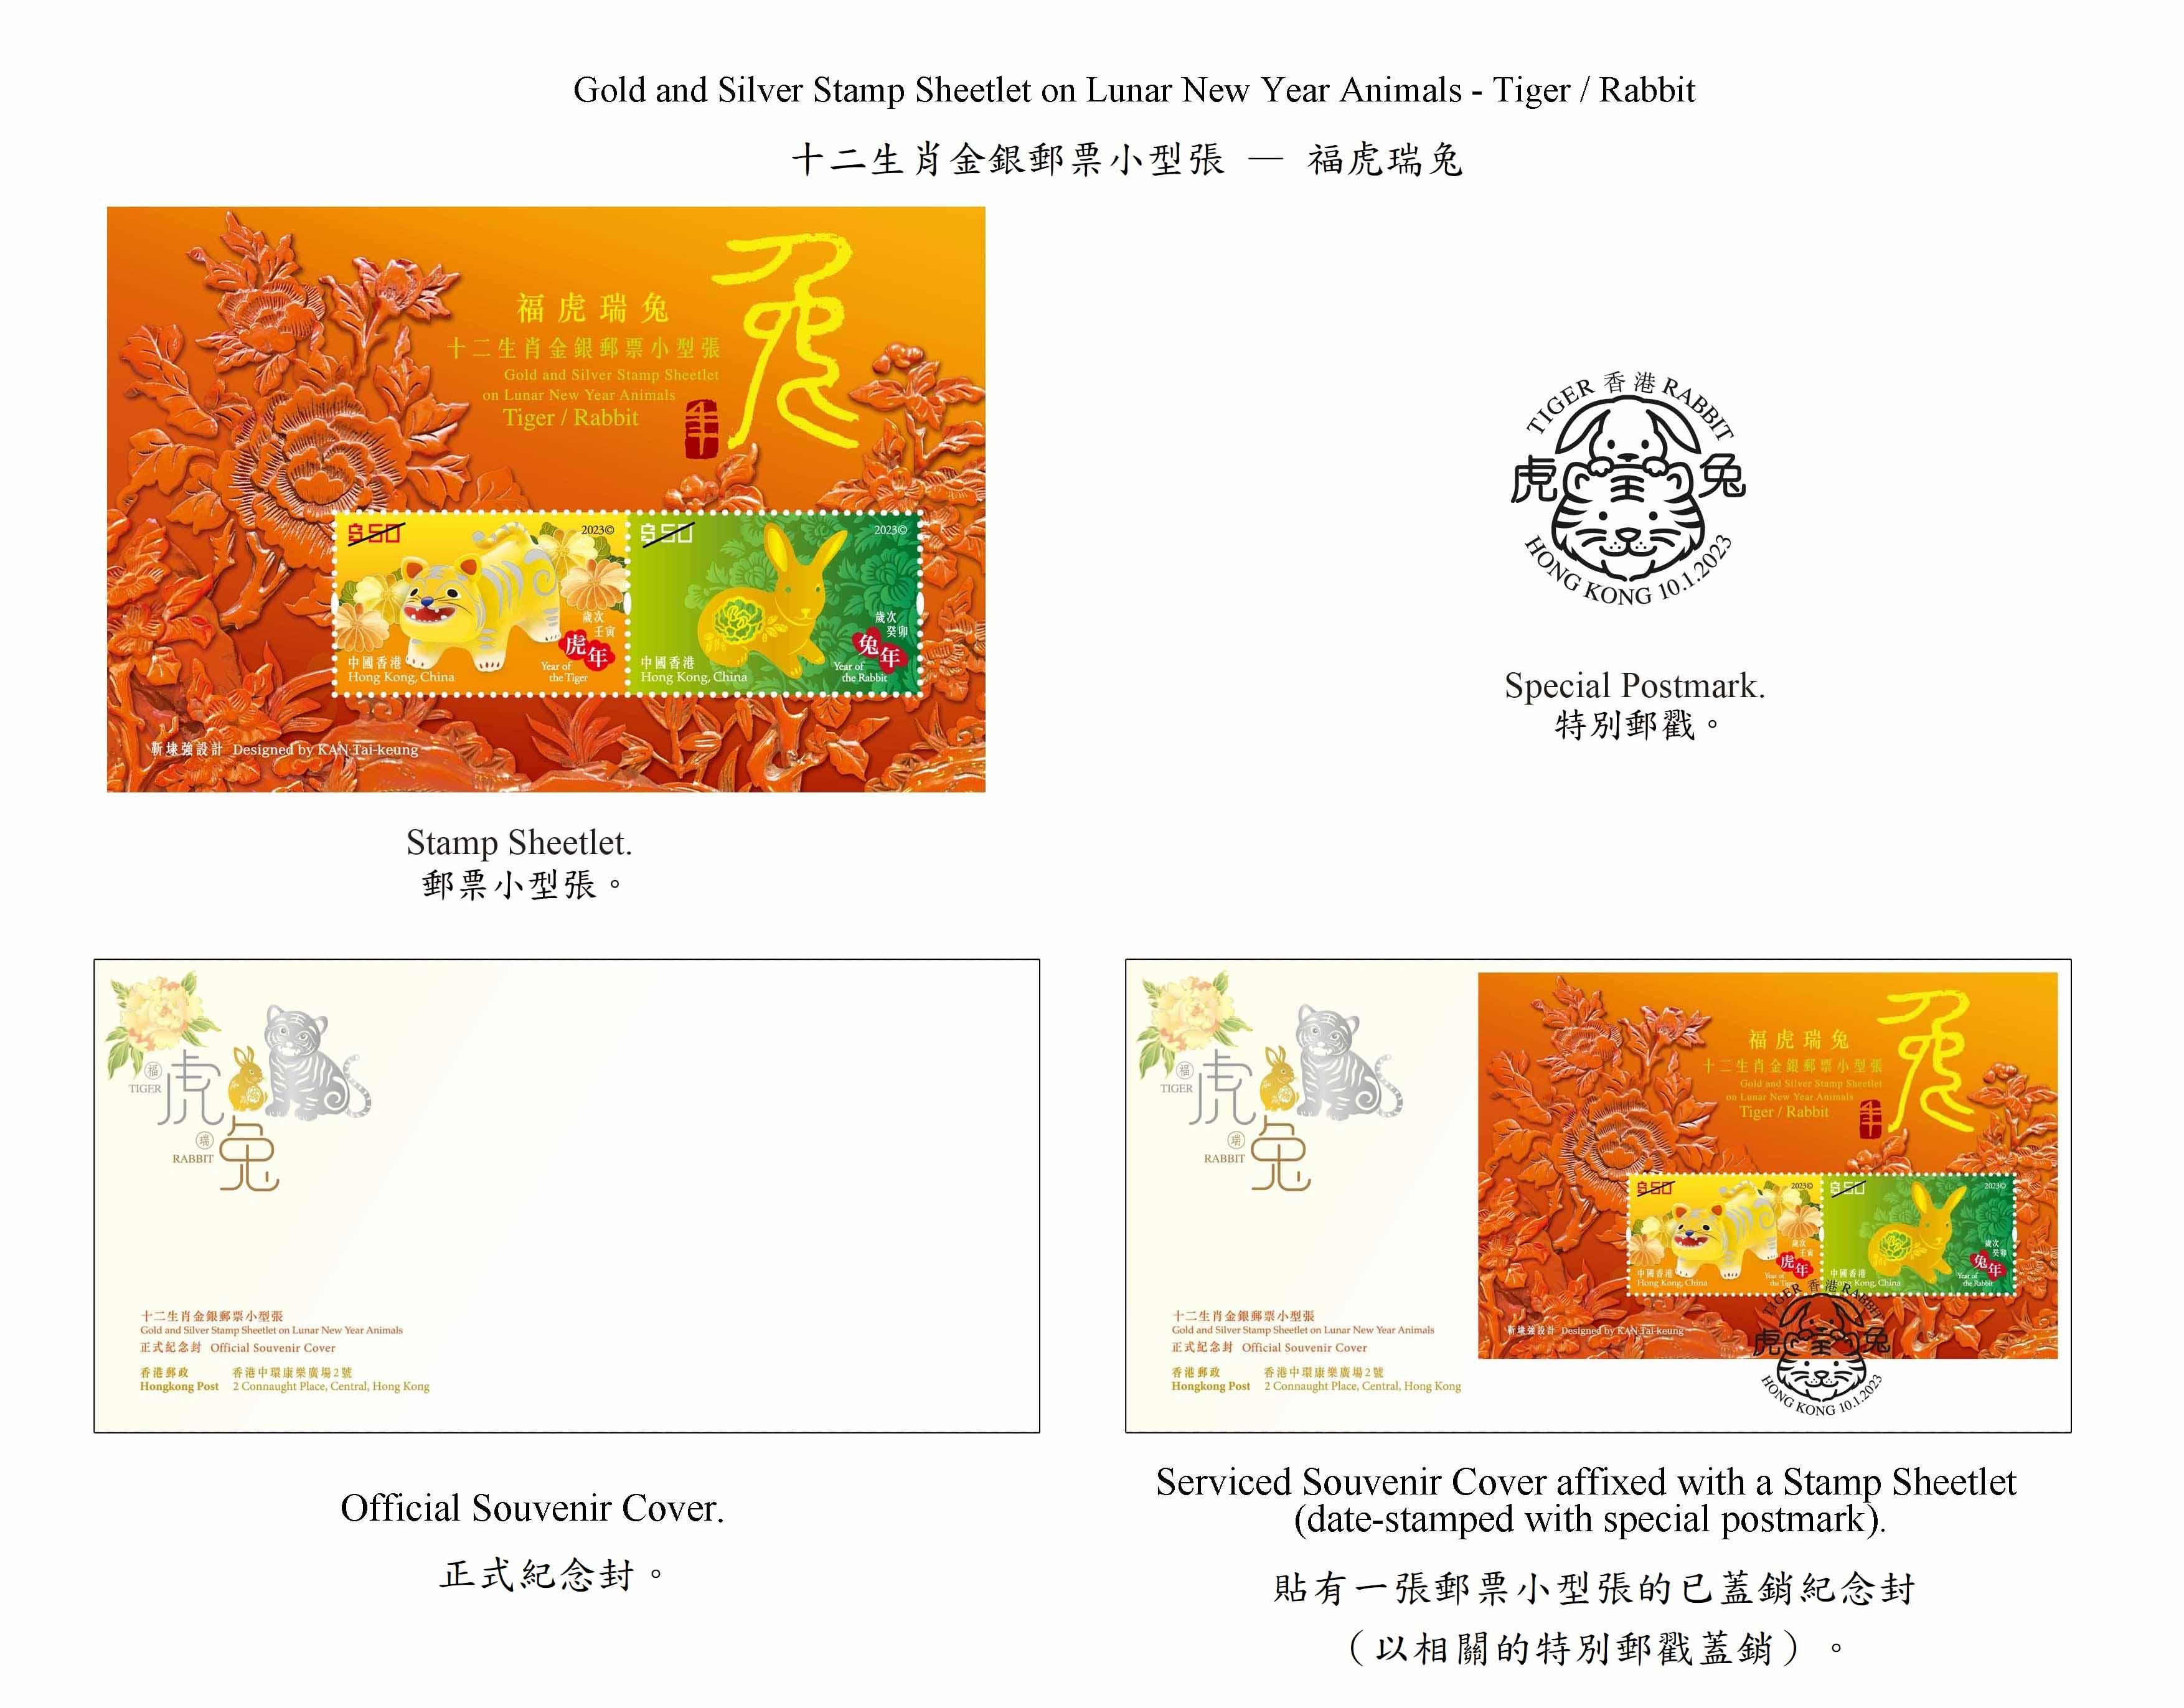 Hongkong Post will launch a special stamp issue and associated philatelic products with the theme "Year of the Rabbit" on January 10, 2023 (Tuesday). The "Gold and Silver Stamp Sheetlet on Lunar New Year Animals - Ox/Tiger" will also be launched on the same day. Photo shows the stamp sheetlet, the souvenir covers and the special postmark.

